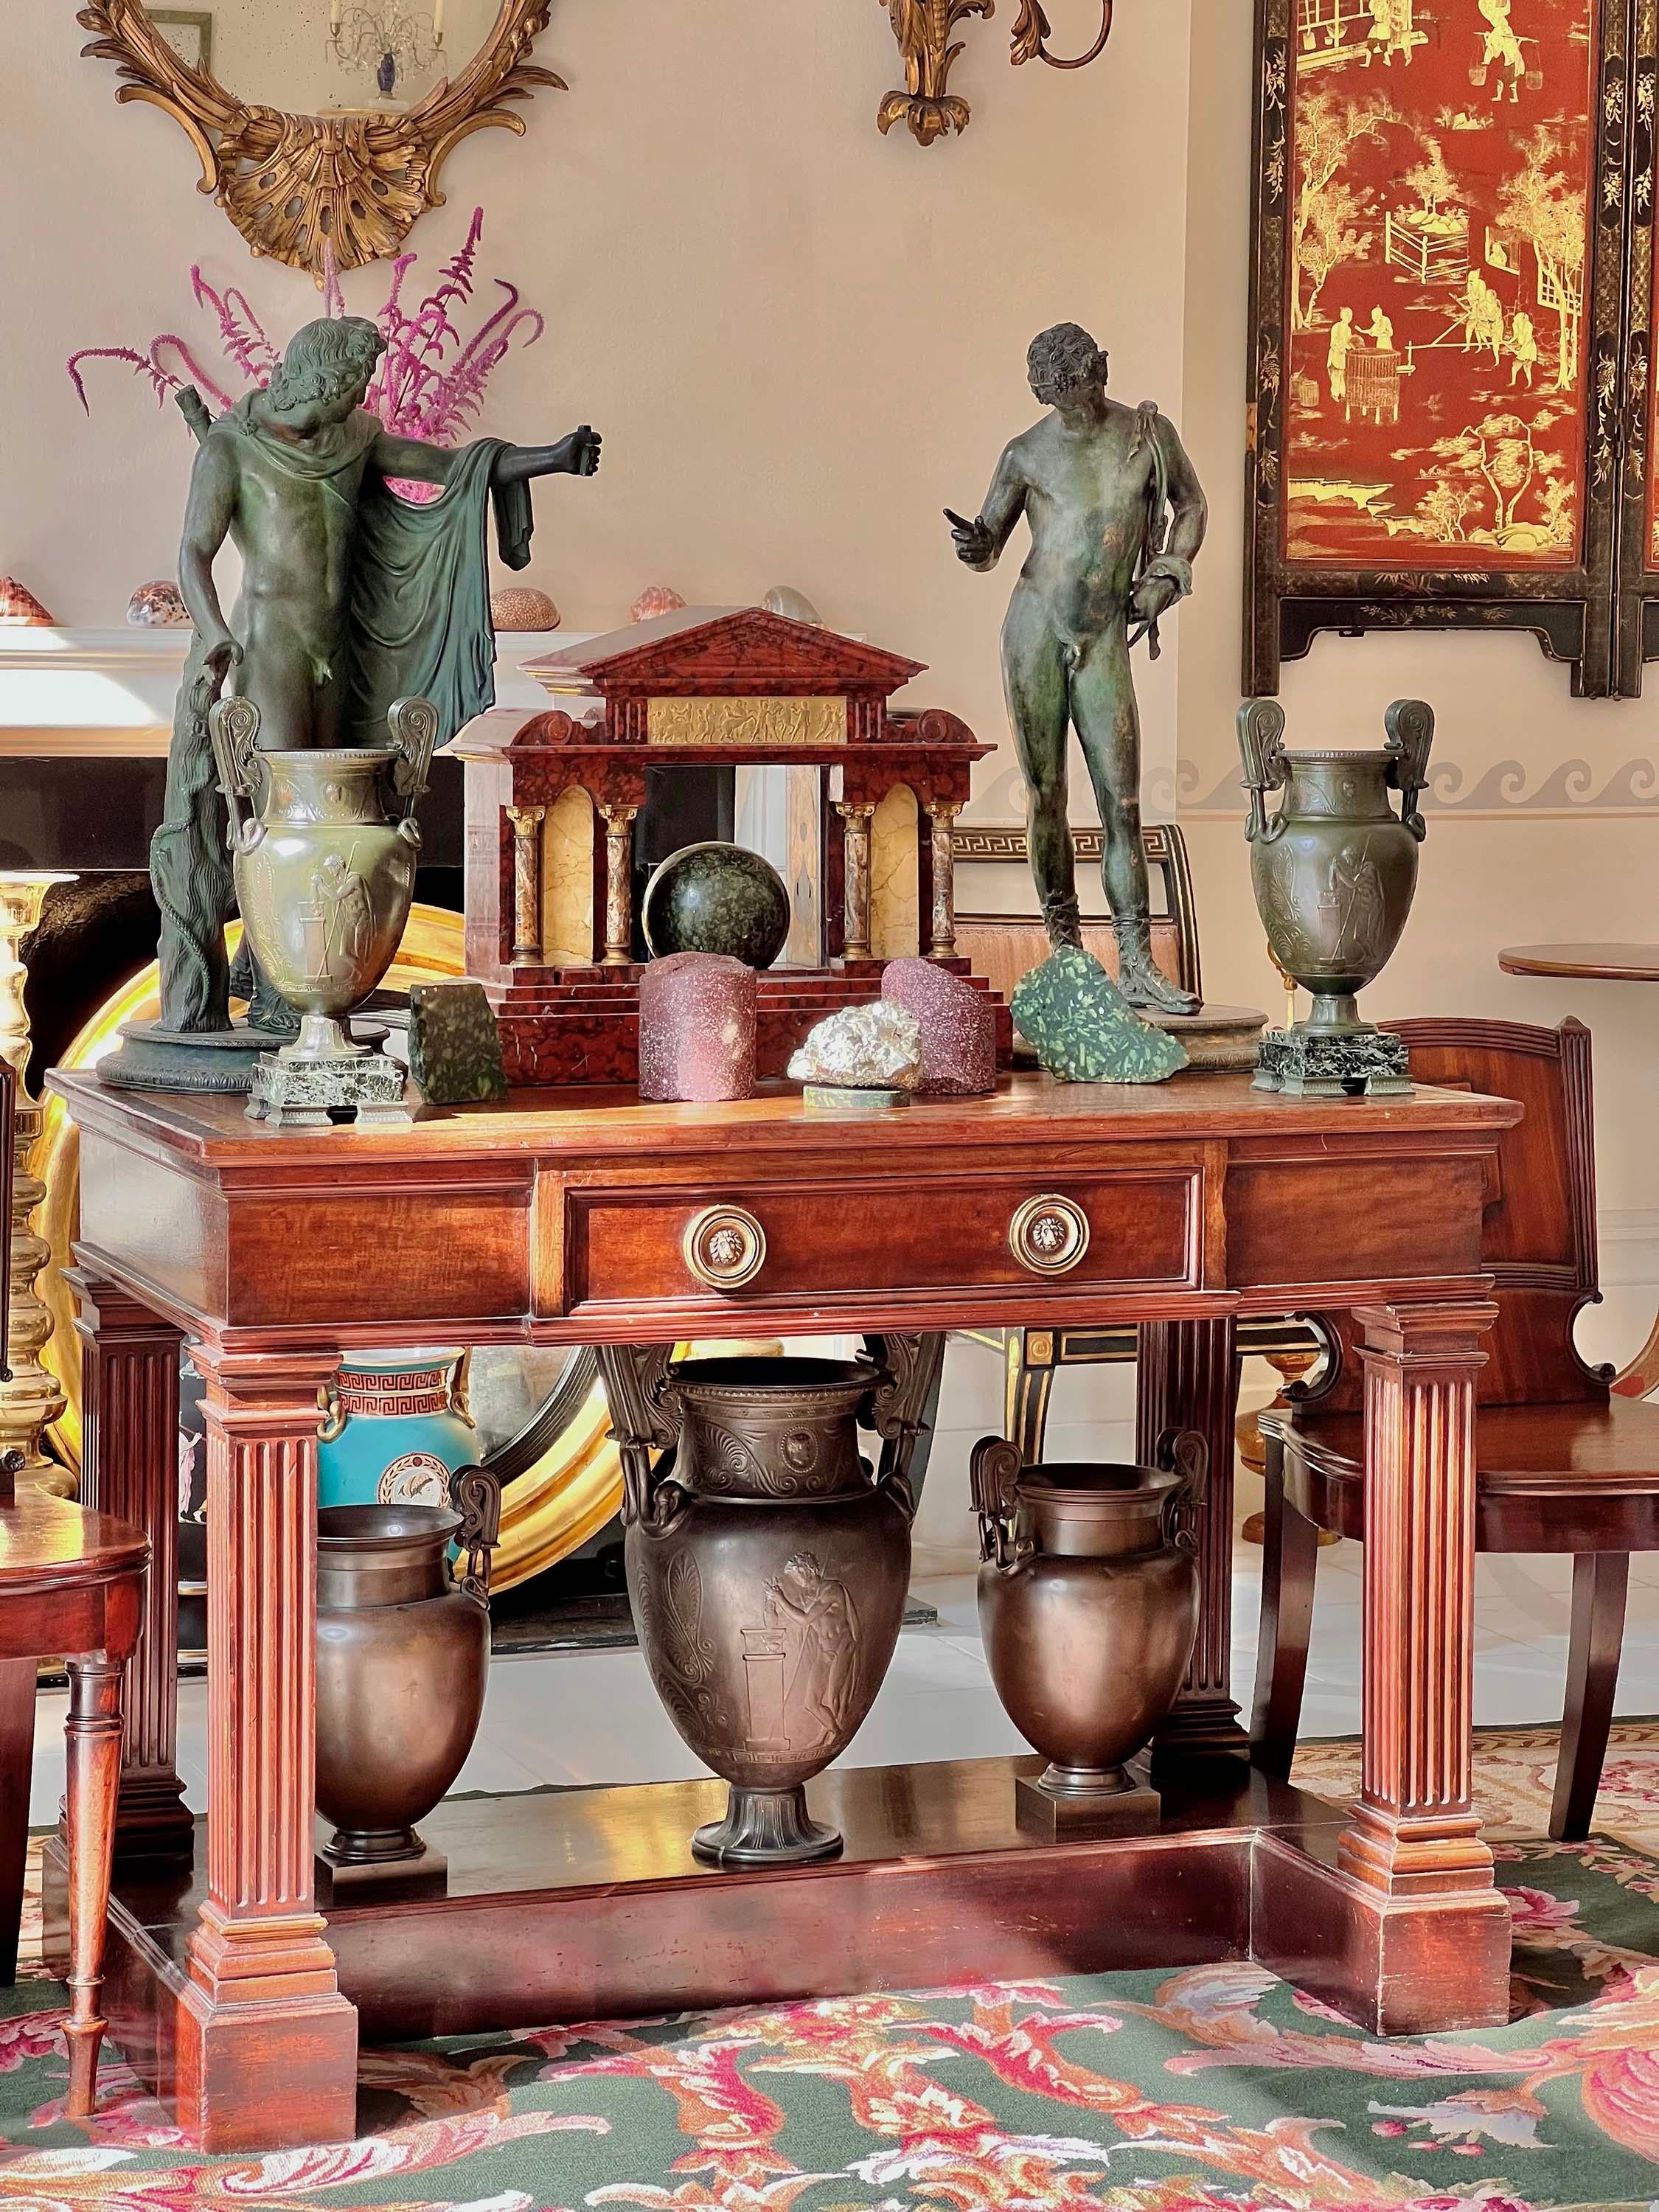 A decorative pair of Grand Tour bronze-patinated urns of ancient Greek 'volute krater' form, 
Italy, 19th century.

Why we like them
We love the decorative look of these urns, evoking the Grand Tour travels of the 19th century. Perfect for lamp